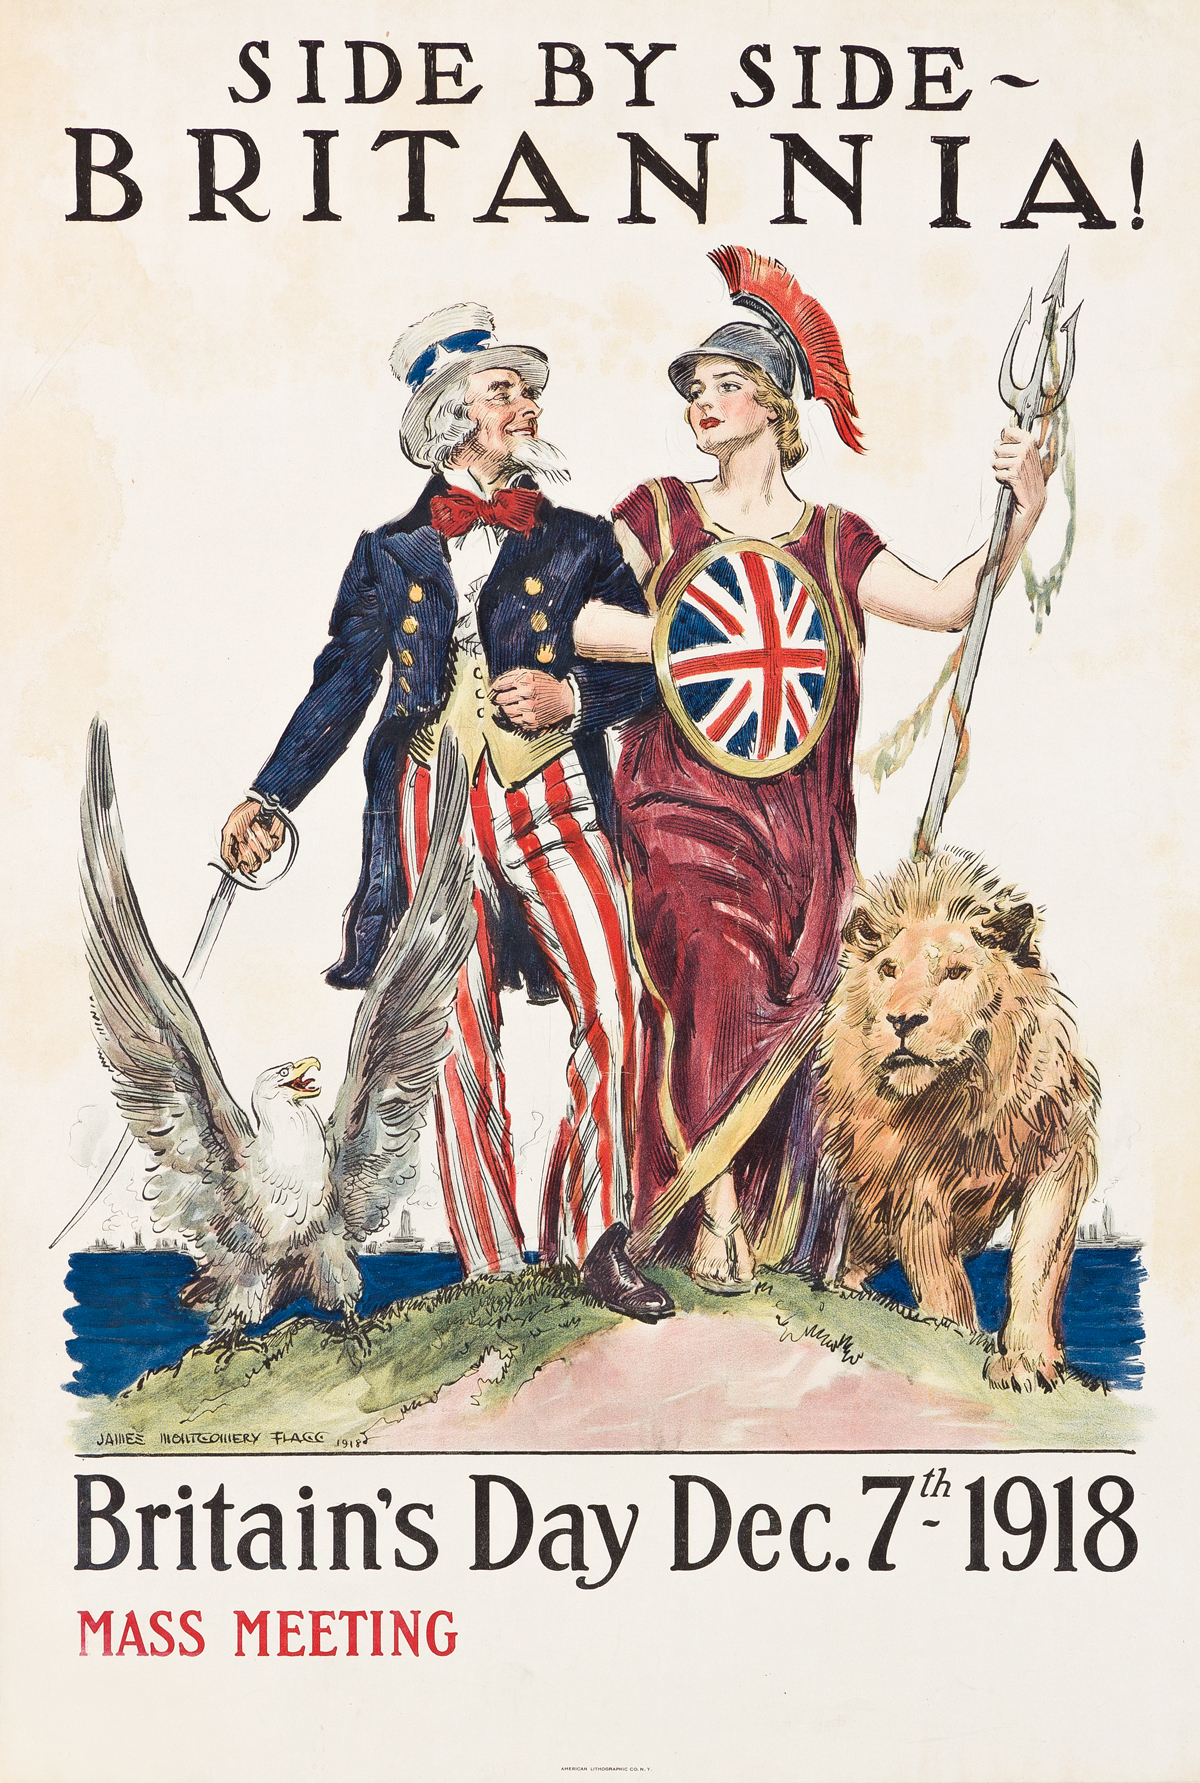 JAMES MONTGOMERY FLAGG (1870-1960).  SIDE BY SIDE - BRITANNIA! / BRITAINS DAY. 1918. 30x20¼ inches, 76¼x51½ cm. American Lithographic